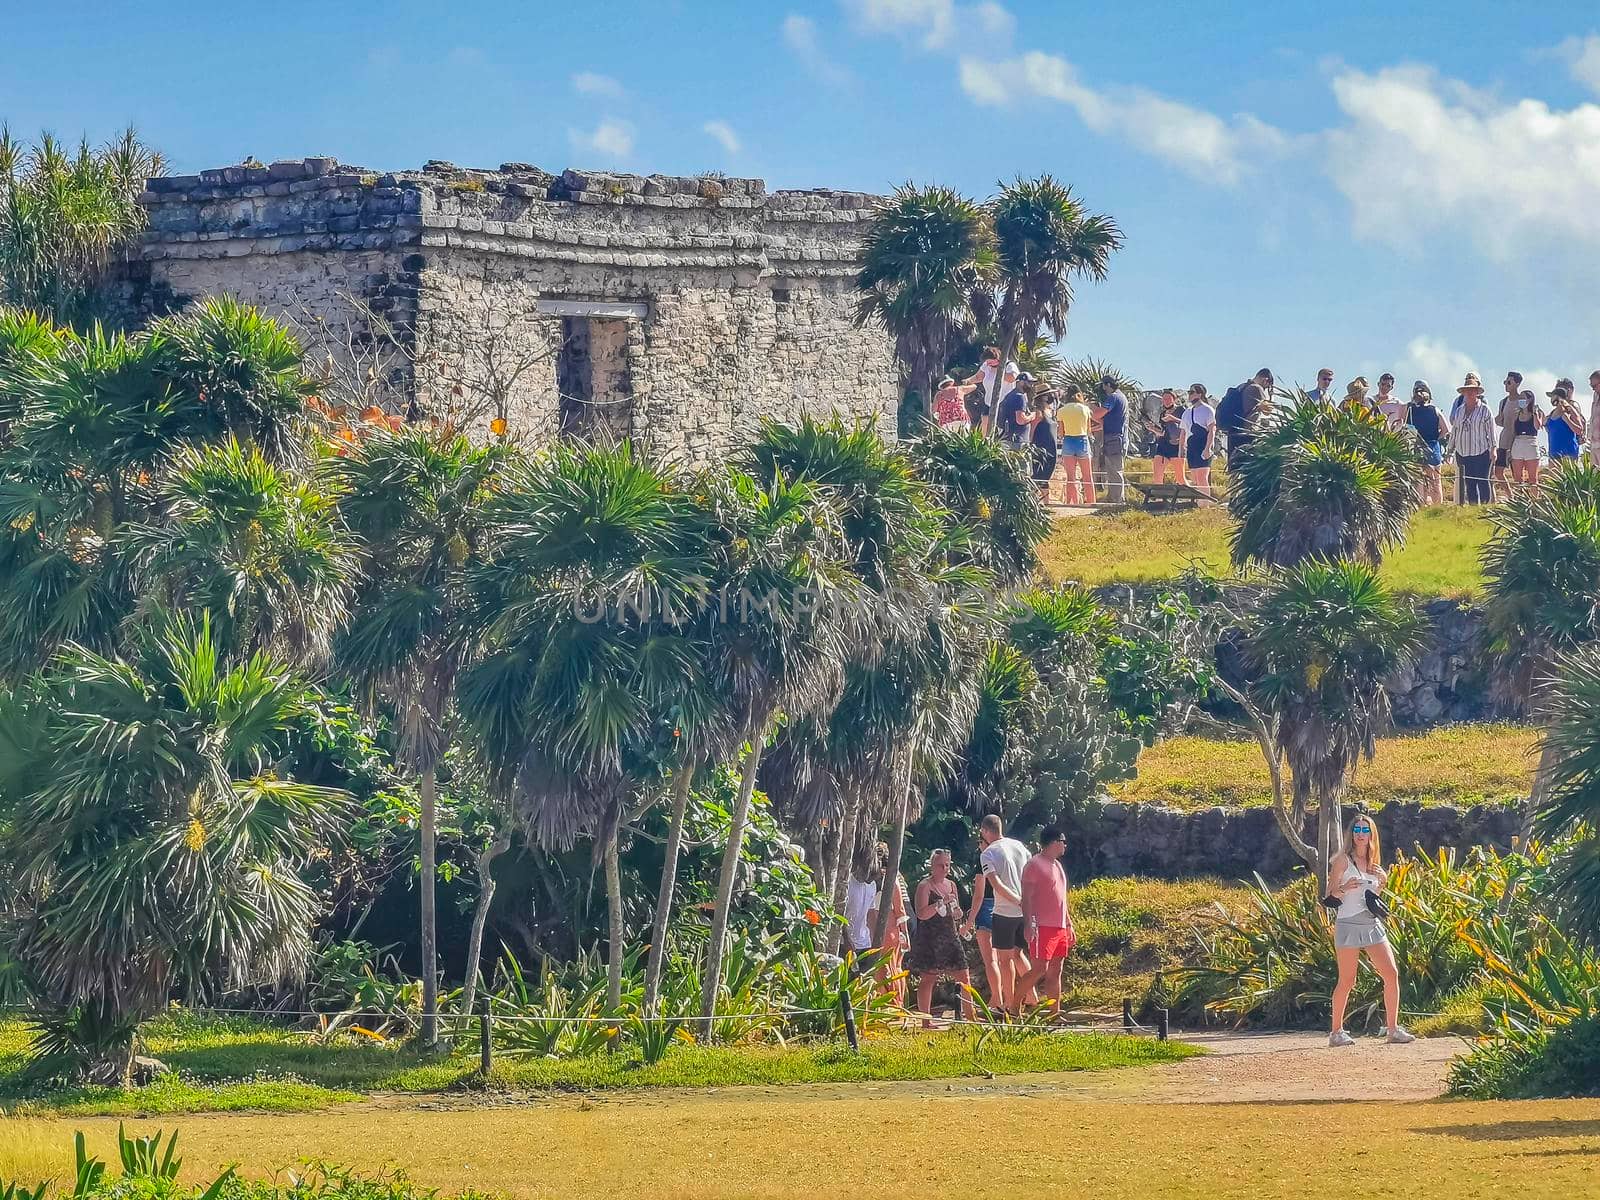 Tulum Mexico 21. February 2022 Ancient Tulum ruins Mayan site with temple ruins pyramids and artifacts in the tropical natural jungle forest palm and seascape panorama view in Tulum Mexico.